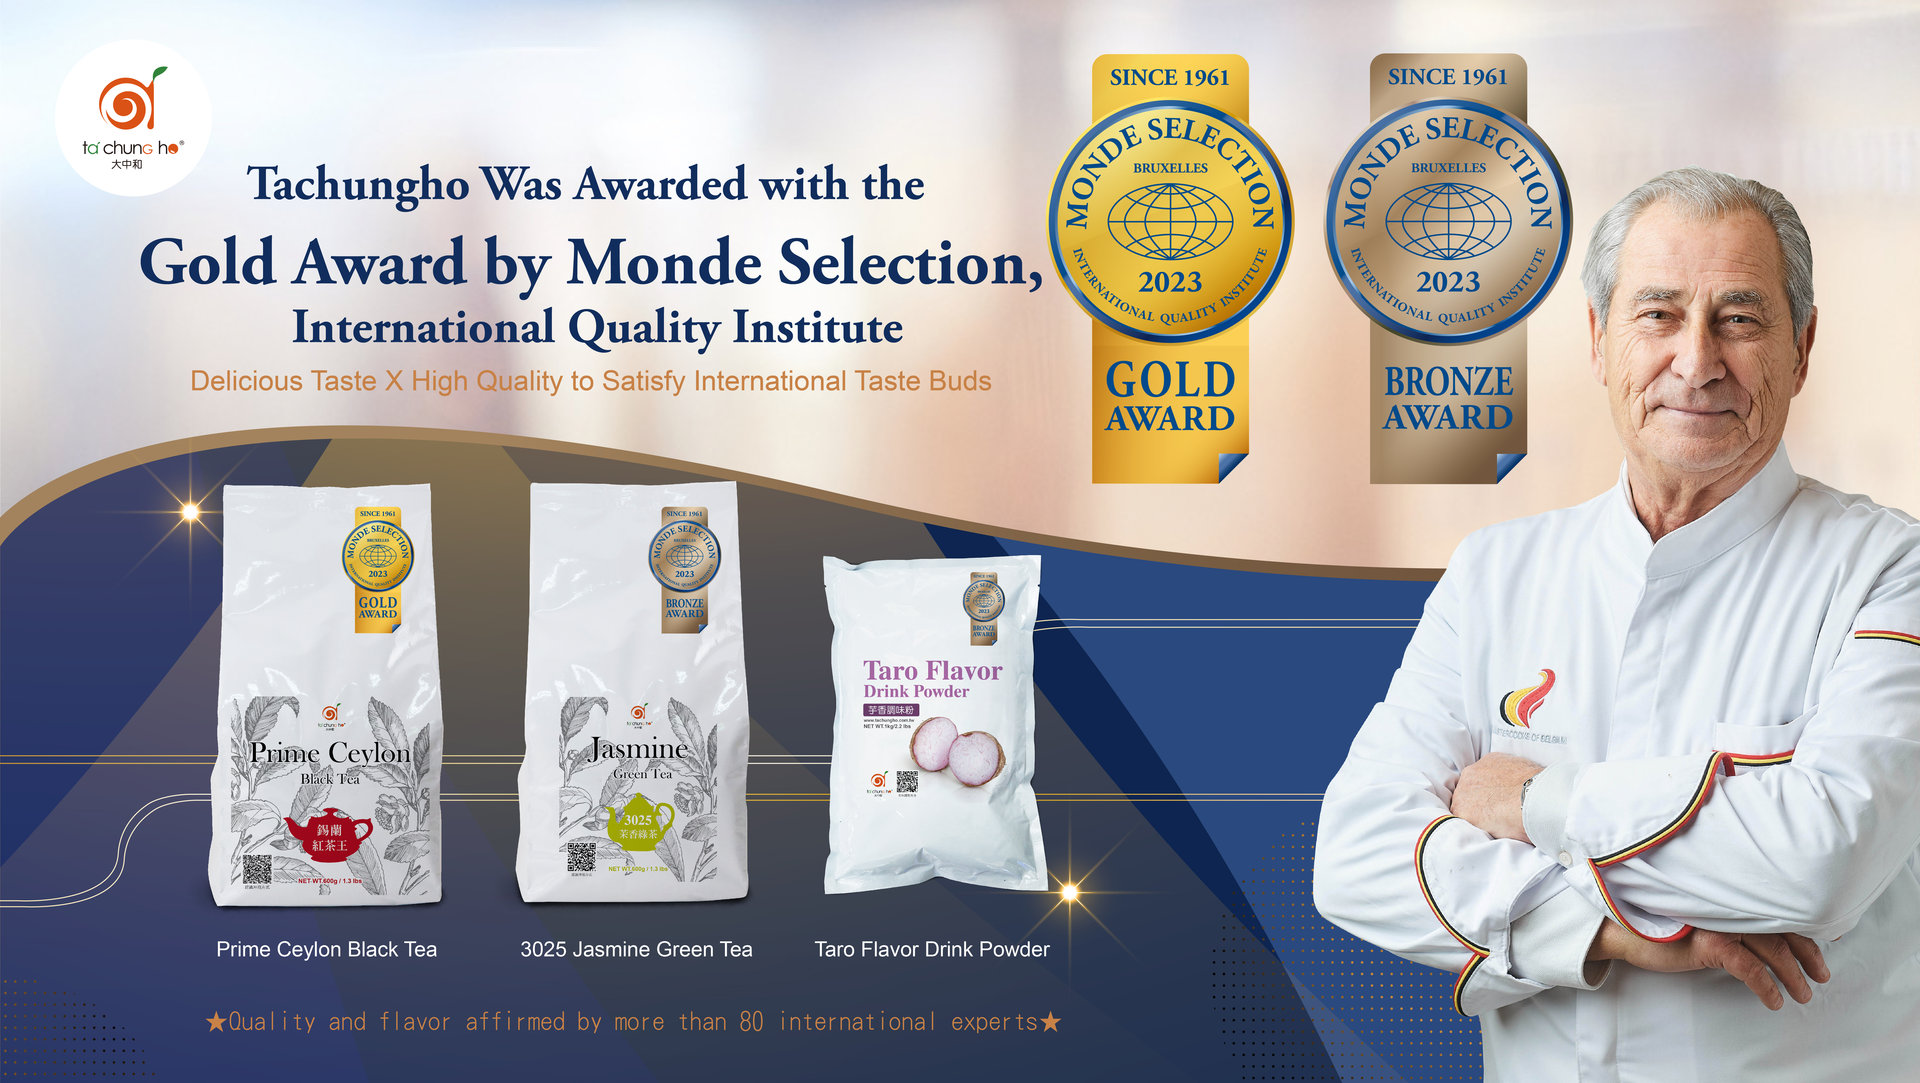 Tachungho Was Awarded the Gold Award by Monde Selection